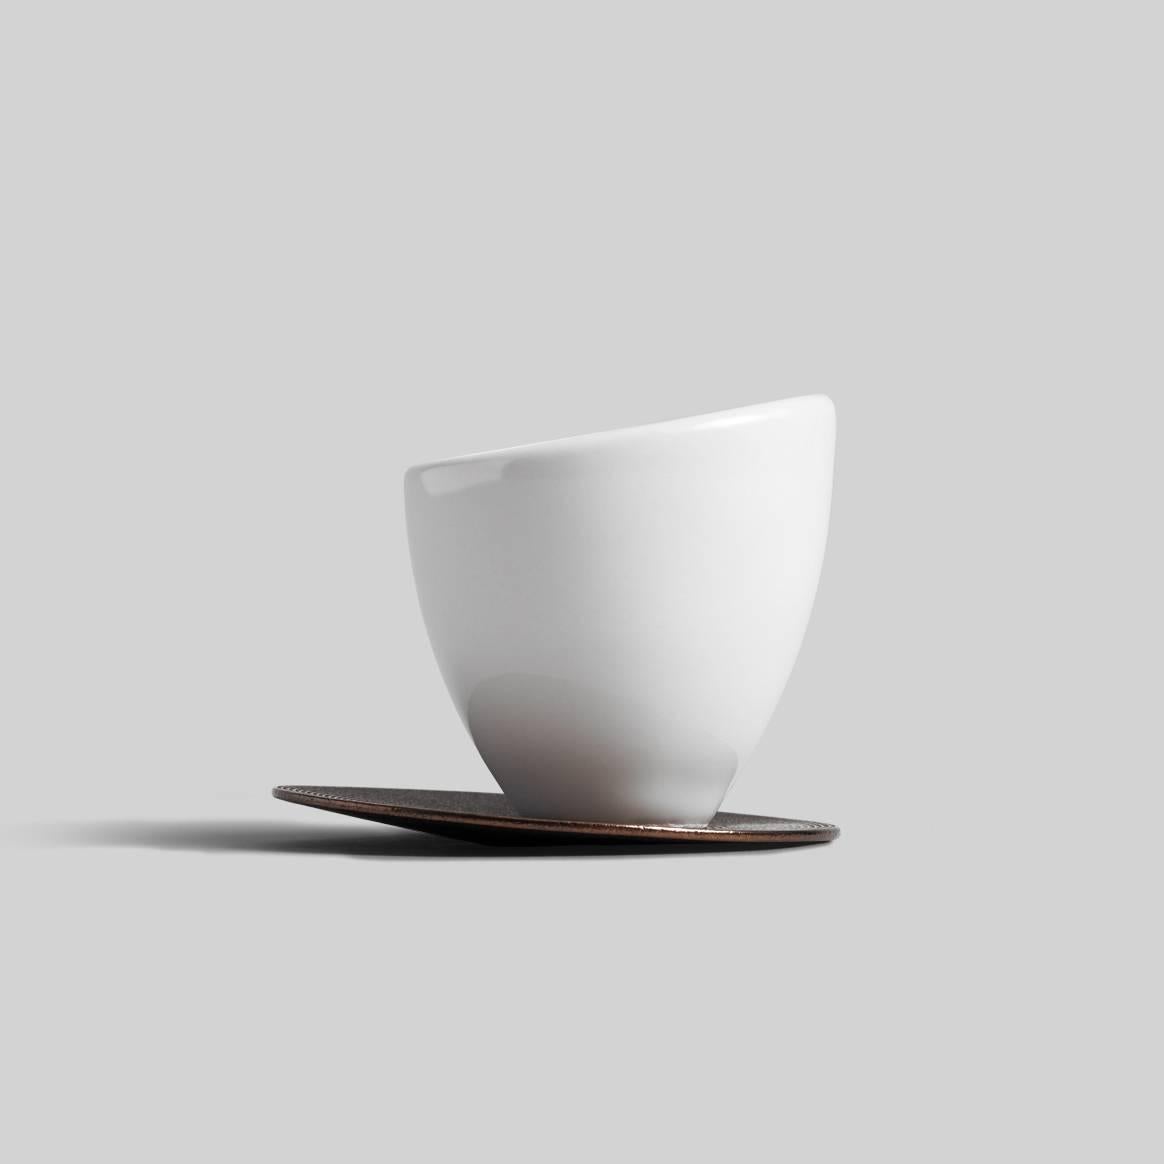 By digitally modifying the cup’s wall thickness, the designer has created a subtle trompe l'oeil: the perfectly centered surface of the espresso sits within a seemingly asymmetrical porcelain frame - a form only possible through 3D printing. Each